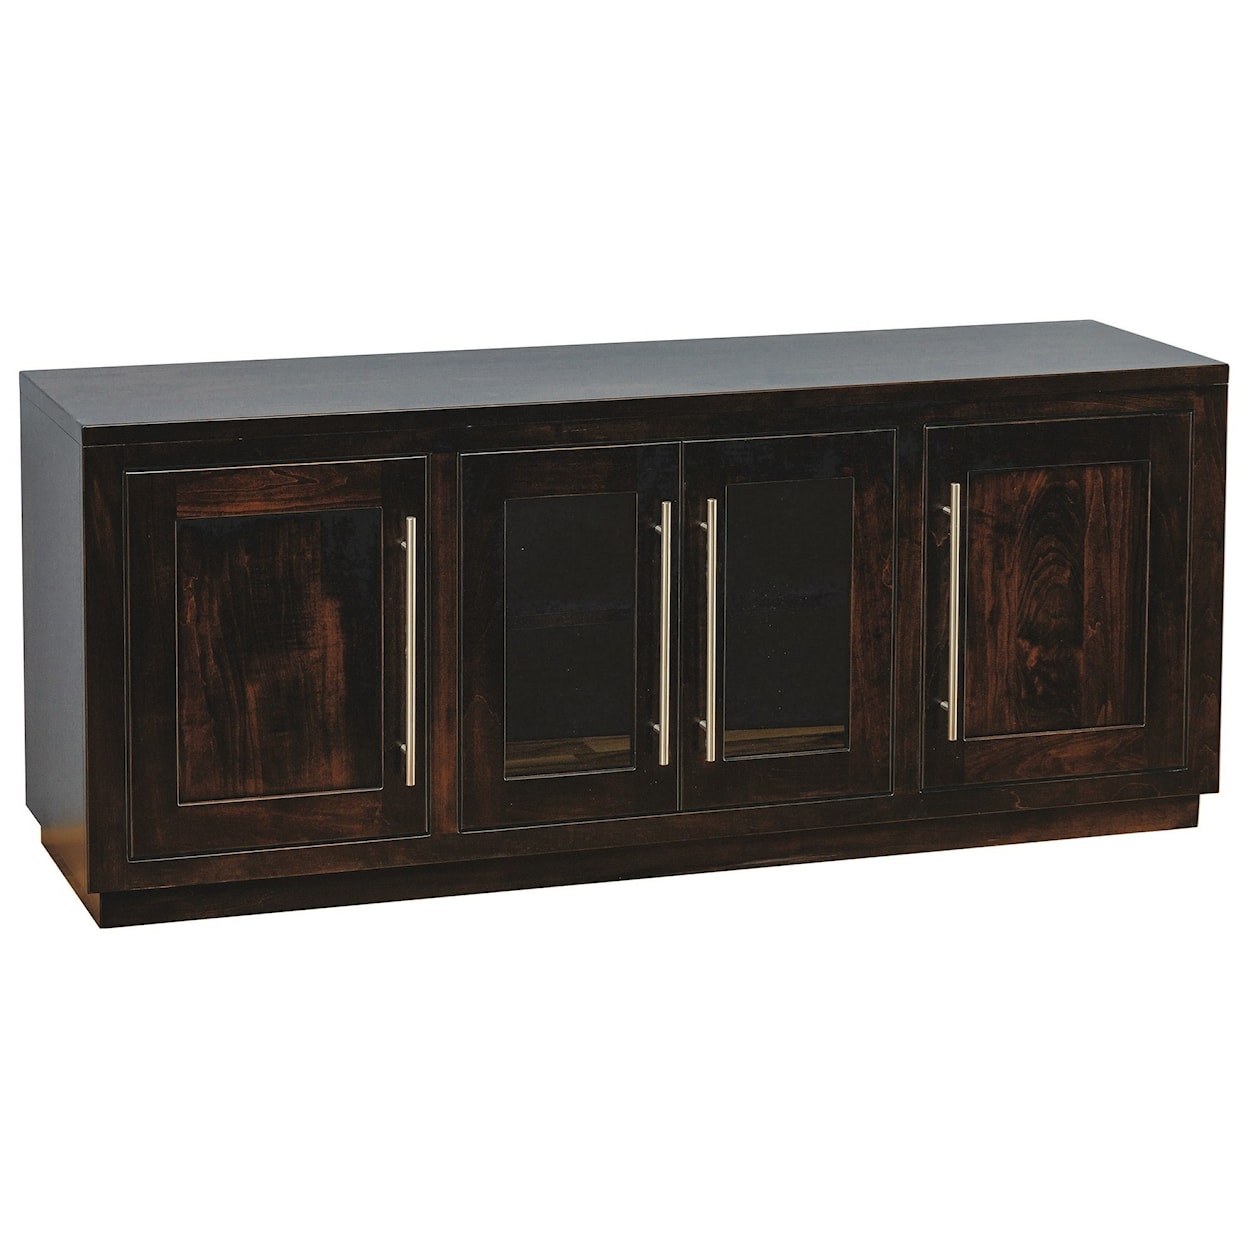 INTEG Wood Products Entertainment NY TV Stand